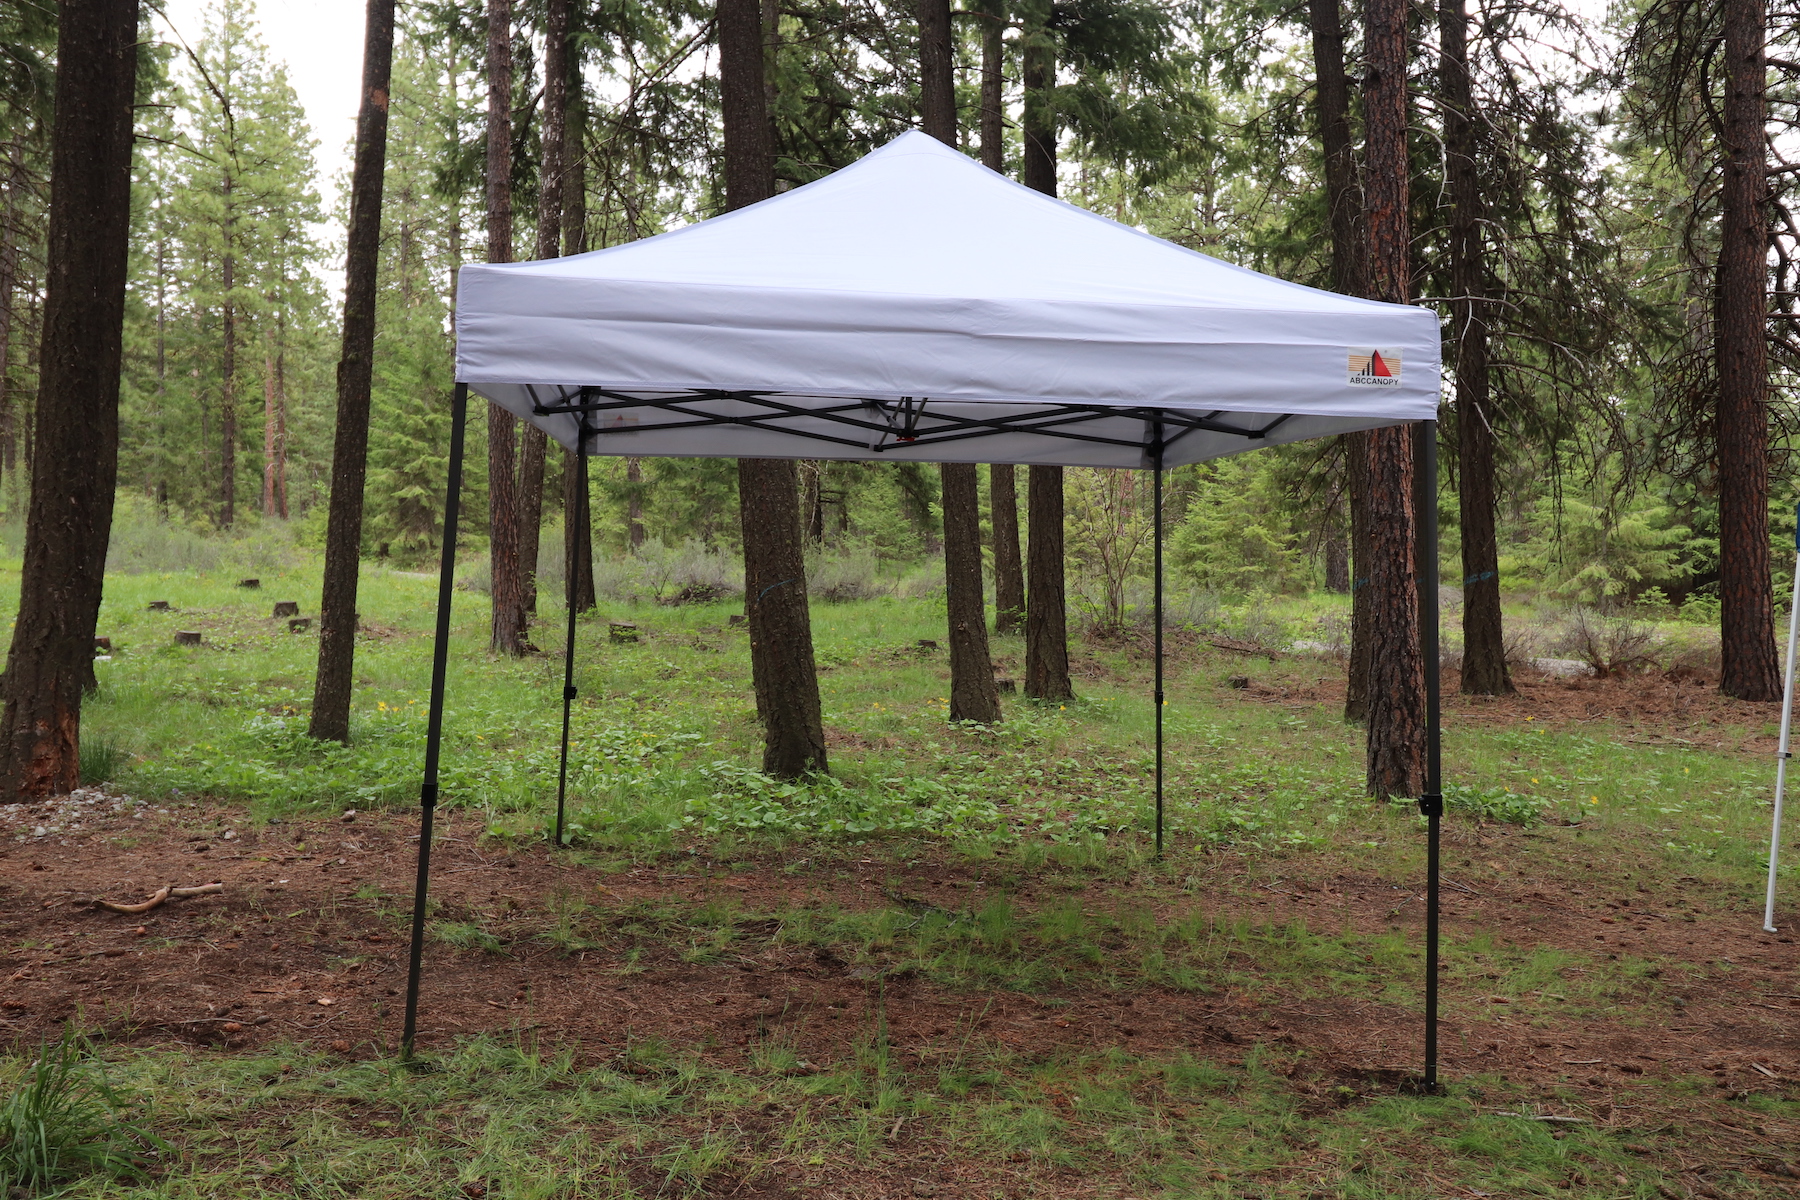 The Best Outdoor Living Product Option ABCCanopy Commercial 10-Foot by 10-Foot Pop-Up Canopy